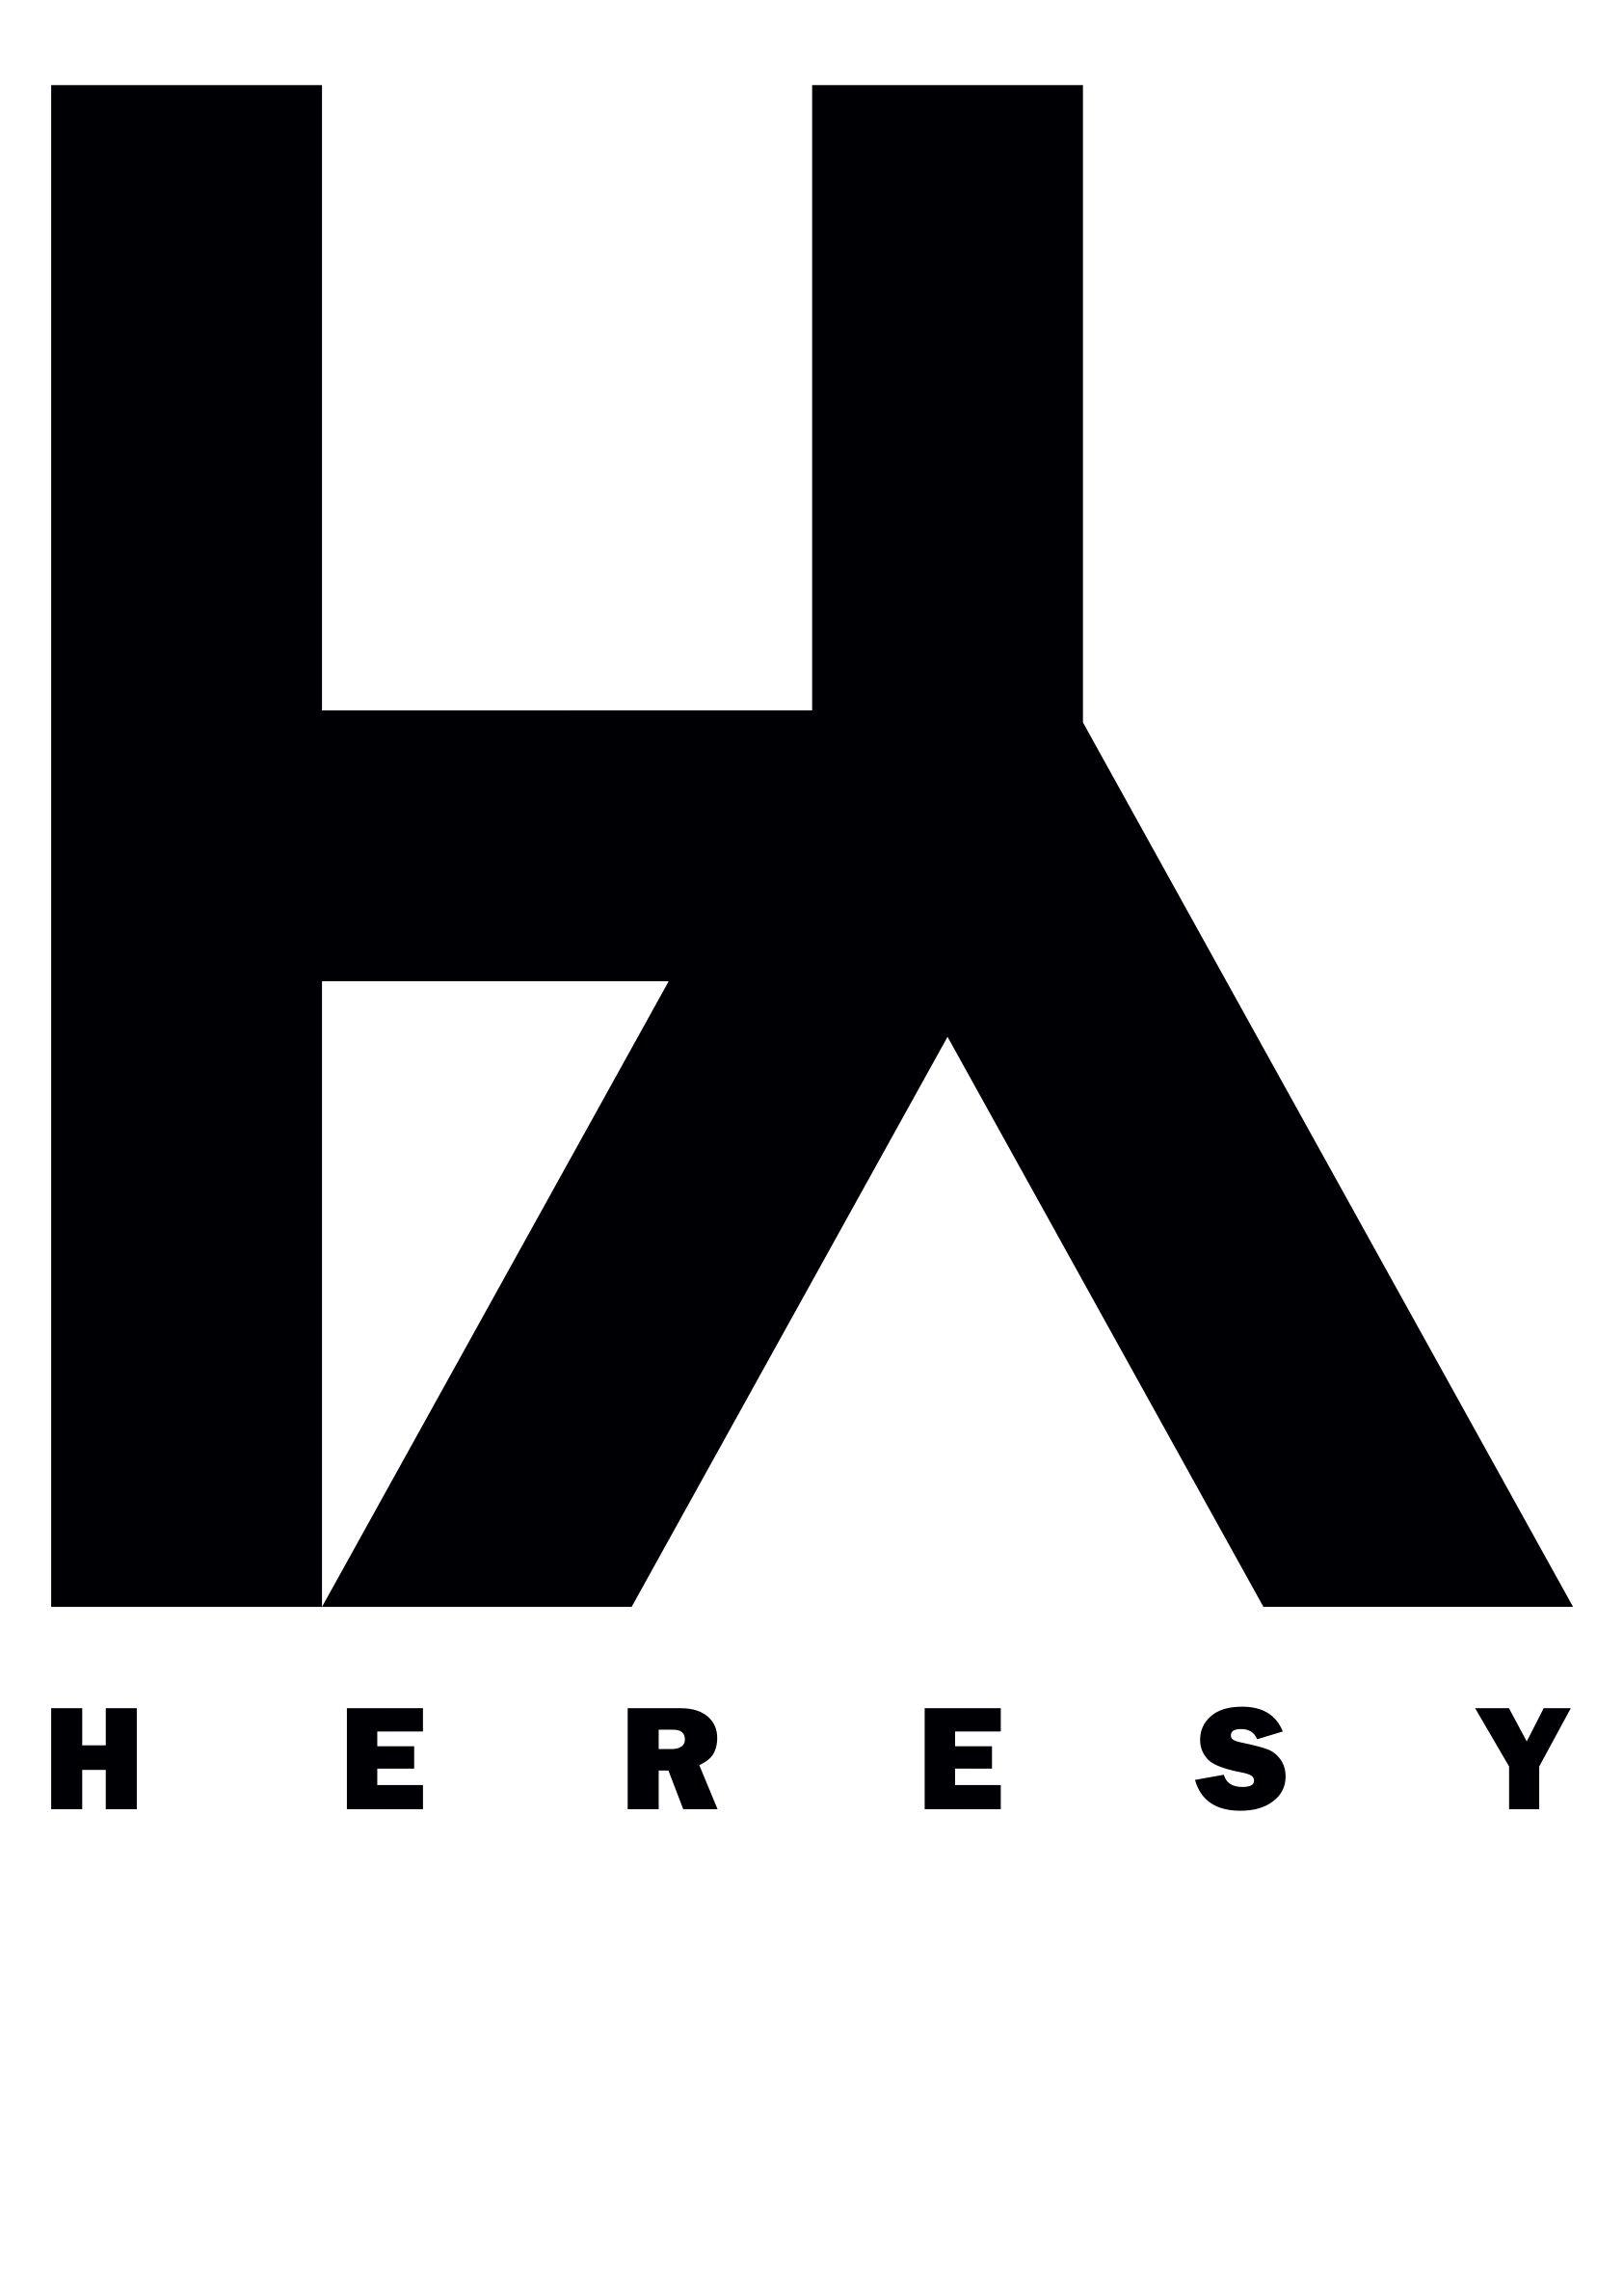 Heresy Logo - Alexis Desolneux launches Heresy Bikes! | Flat Matters Online